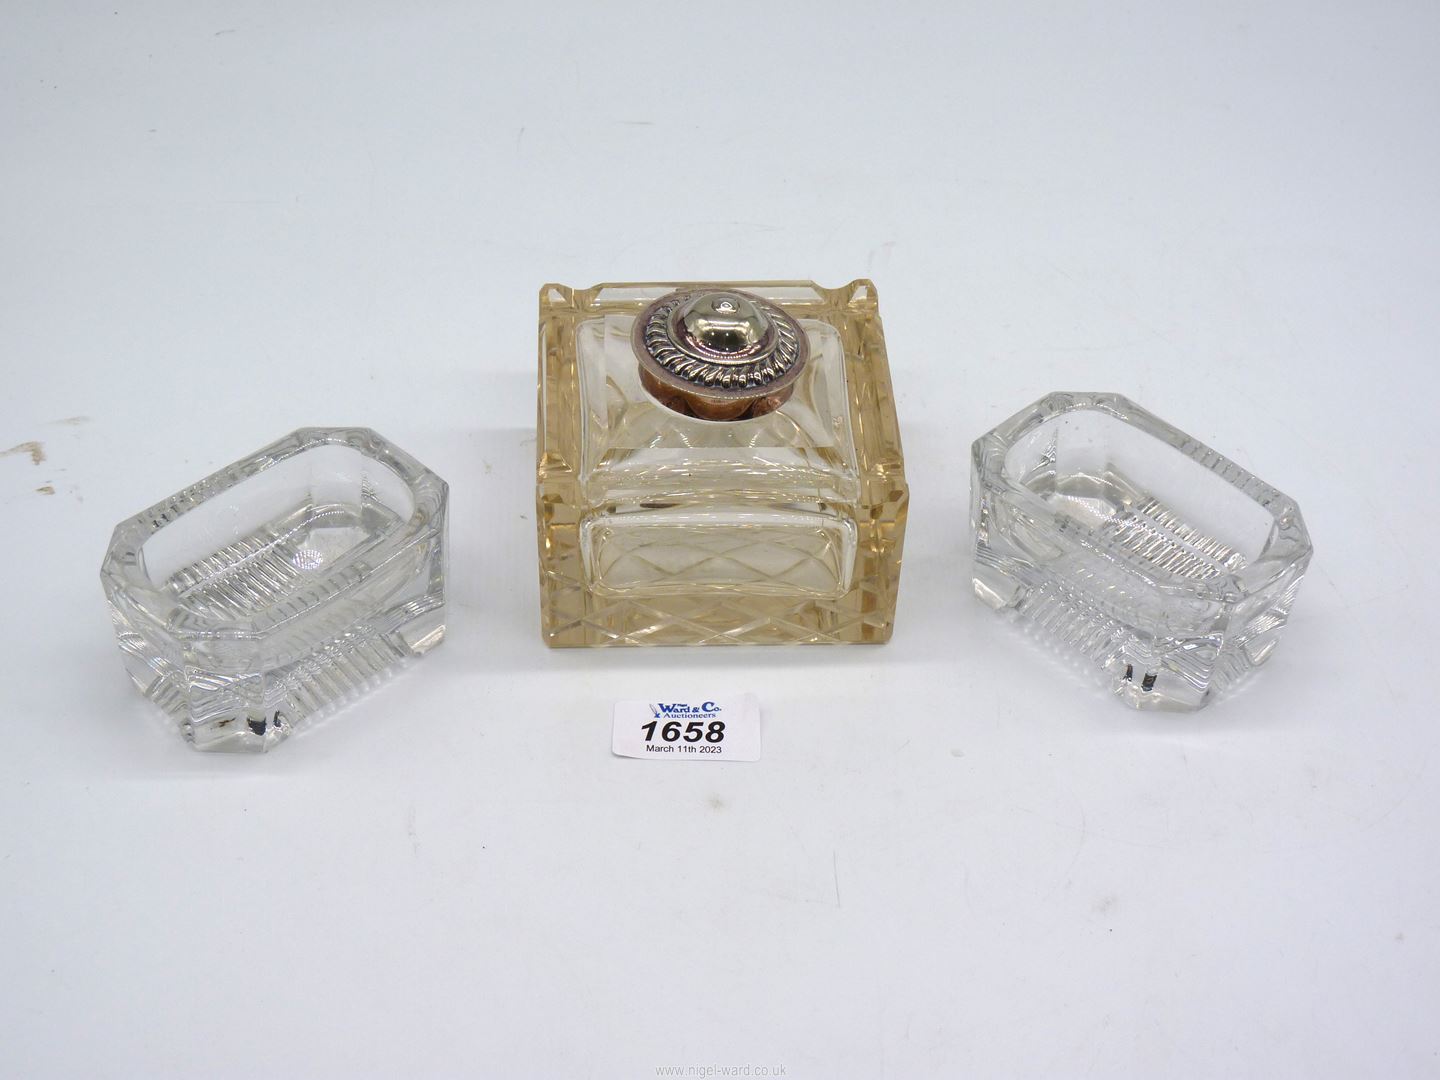 A heavy glass Inkwell with white metal lid and a pair of heavy glass salts.